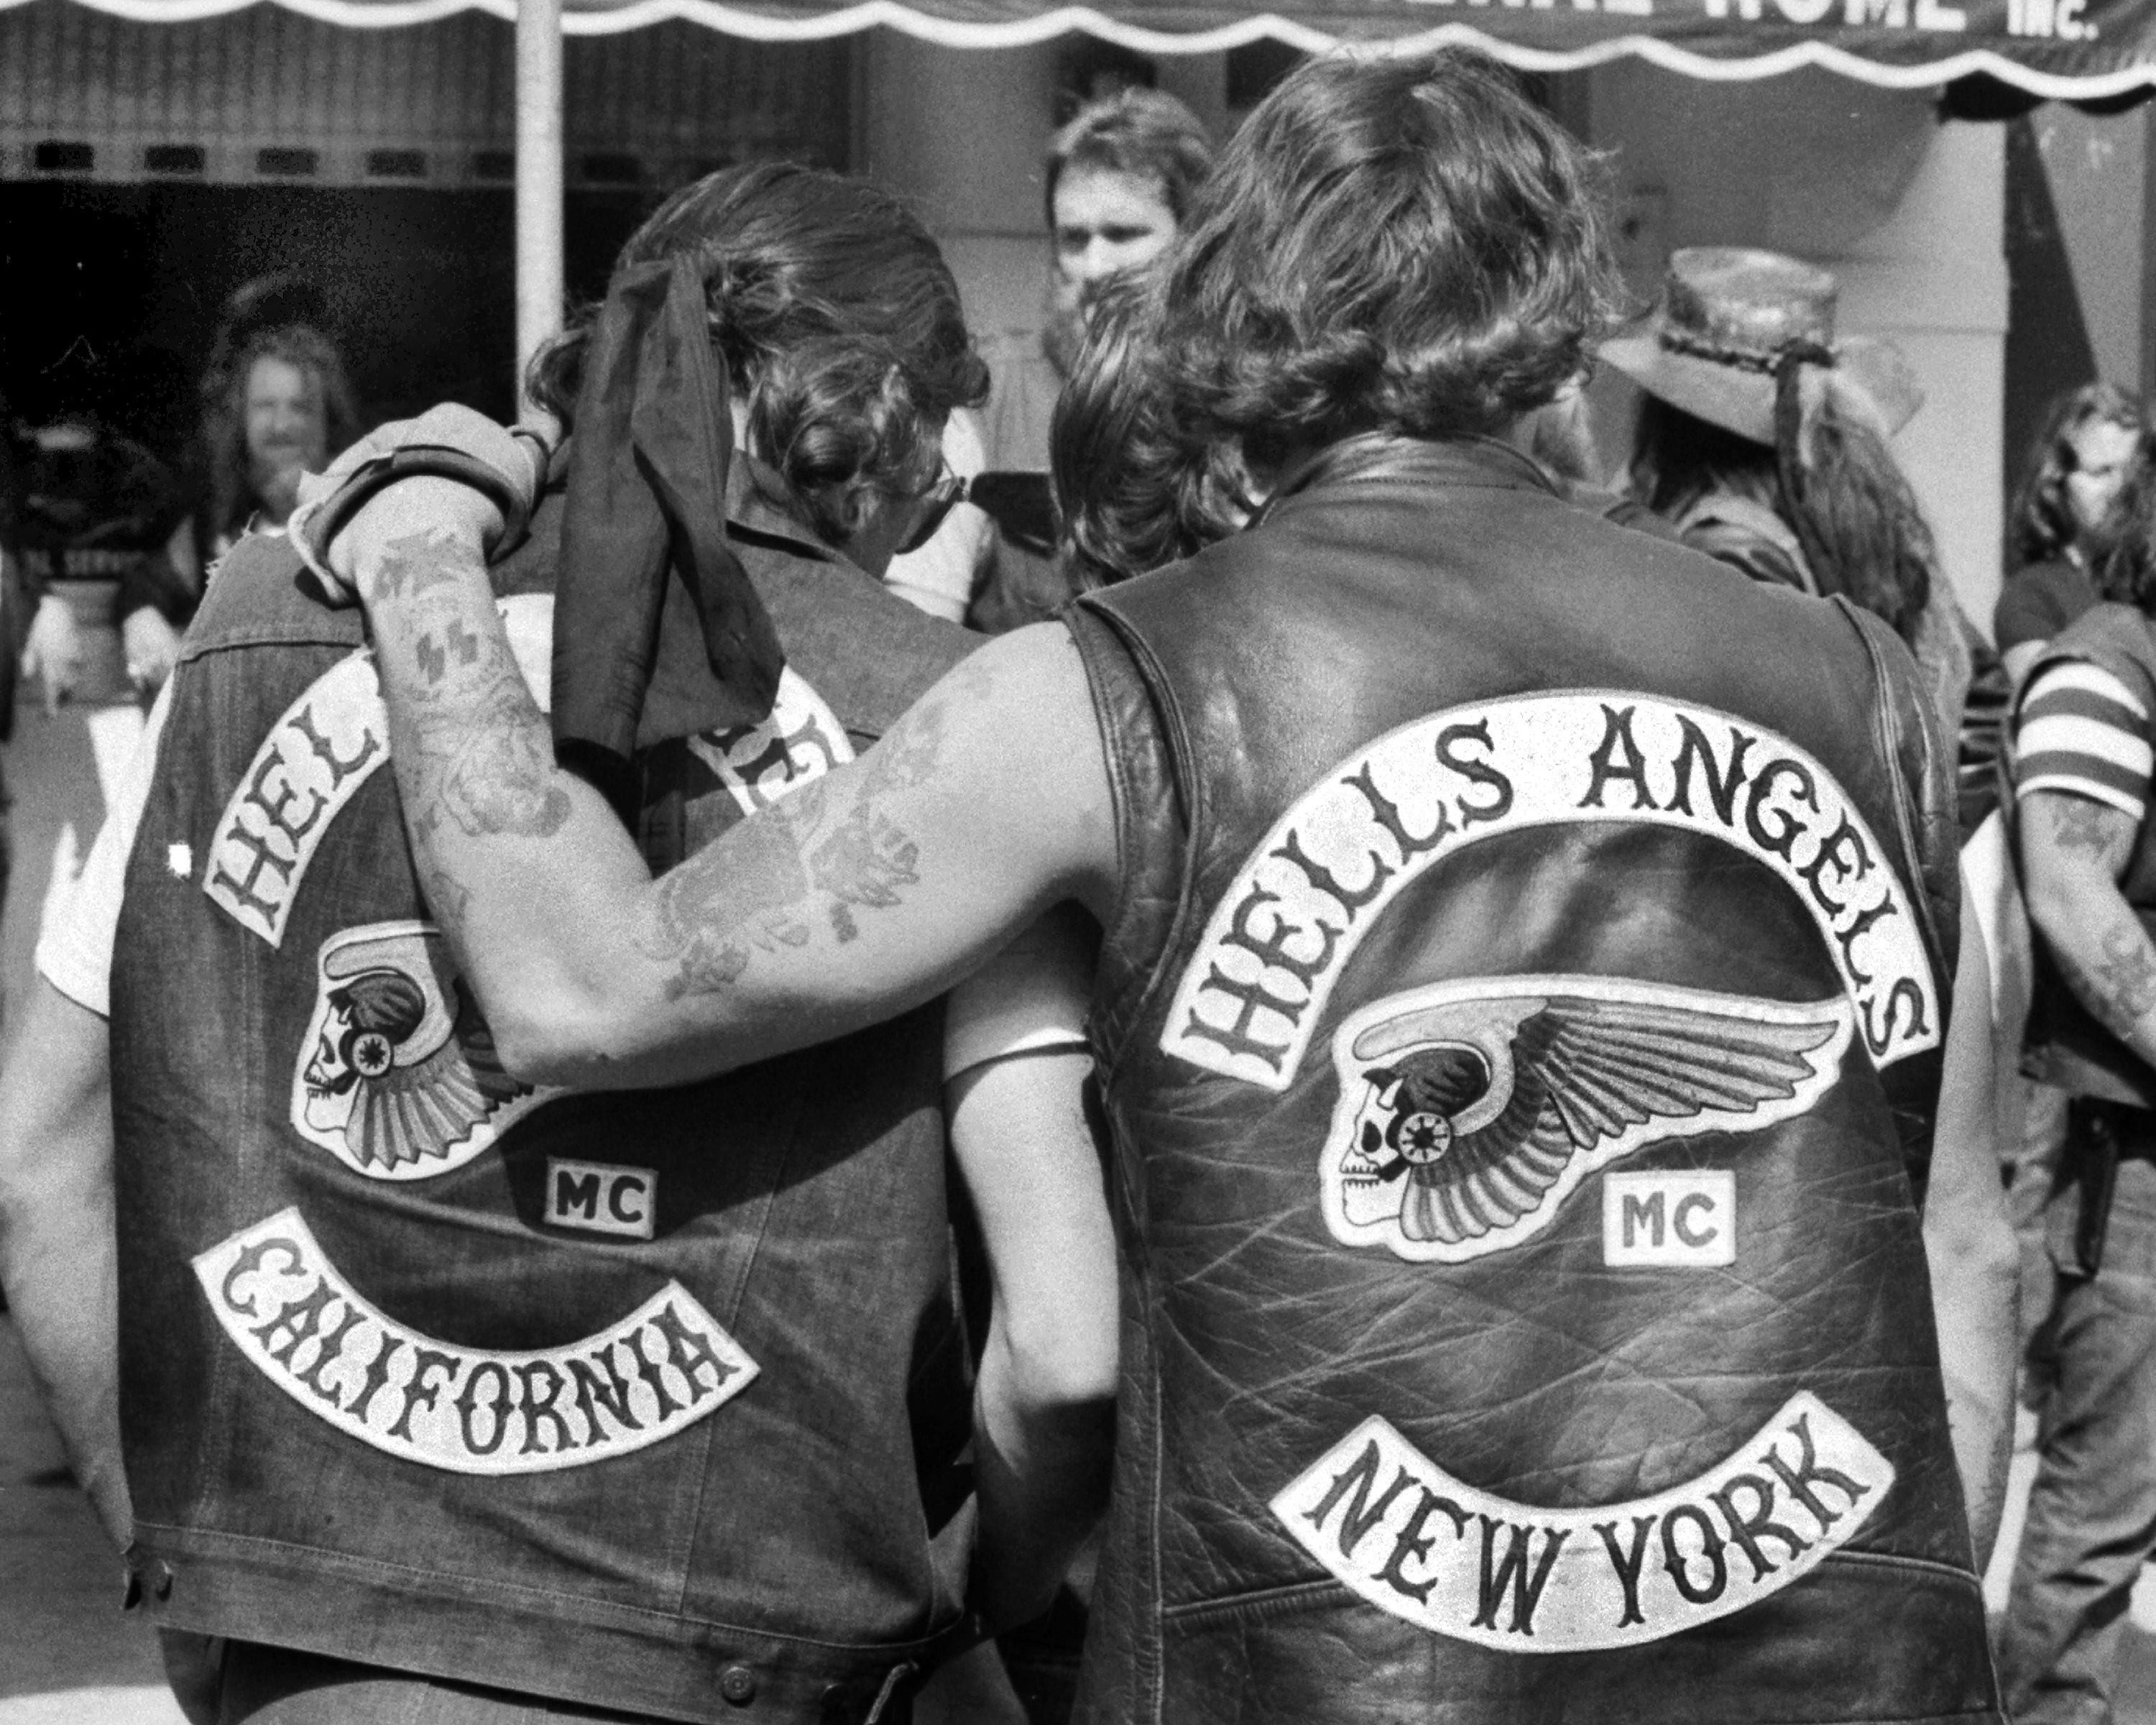 Hells Angels local member from New York consoles mourner fro